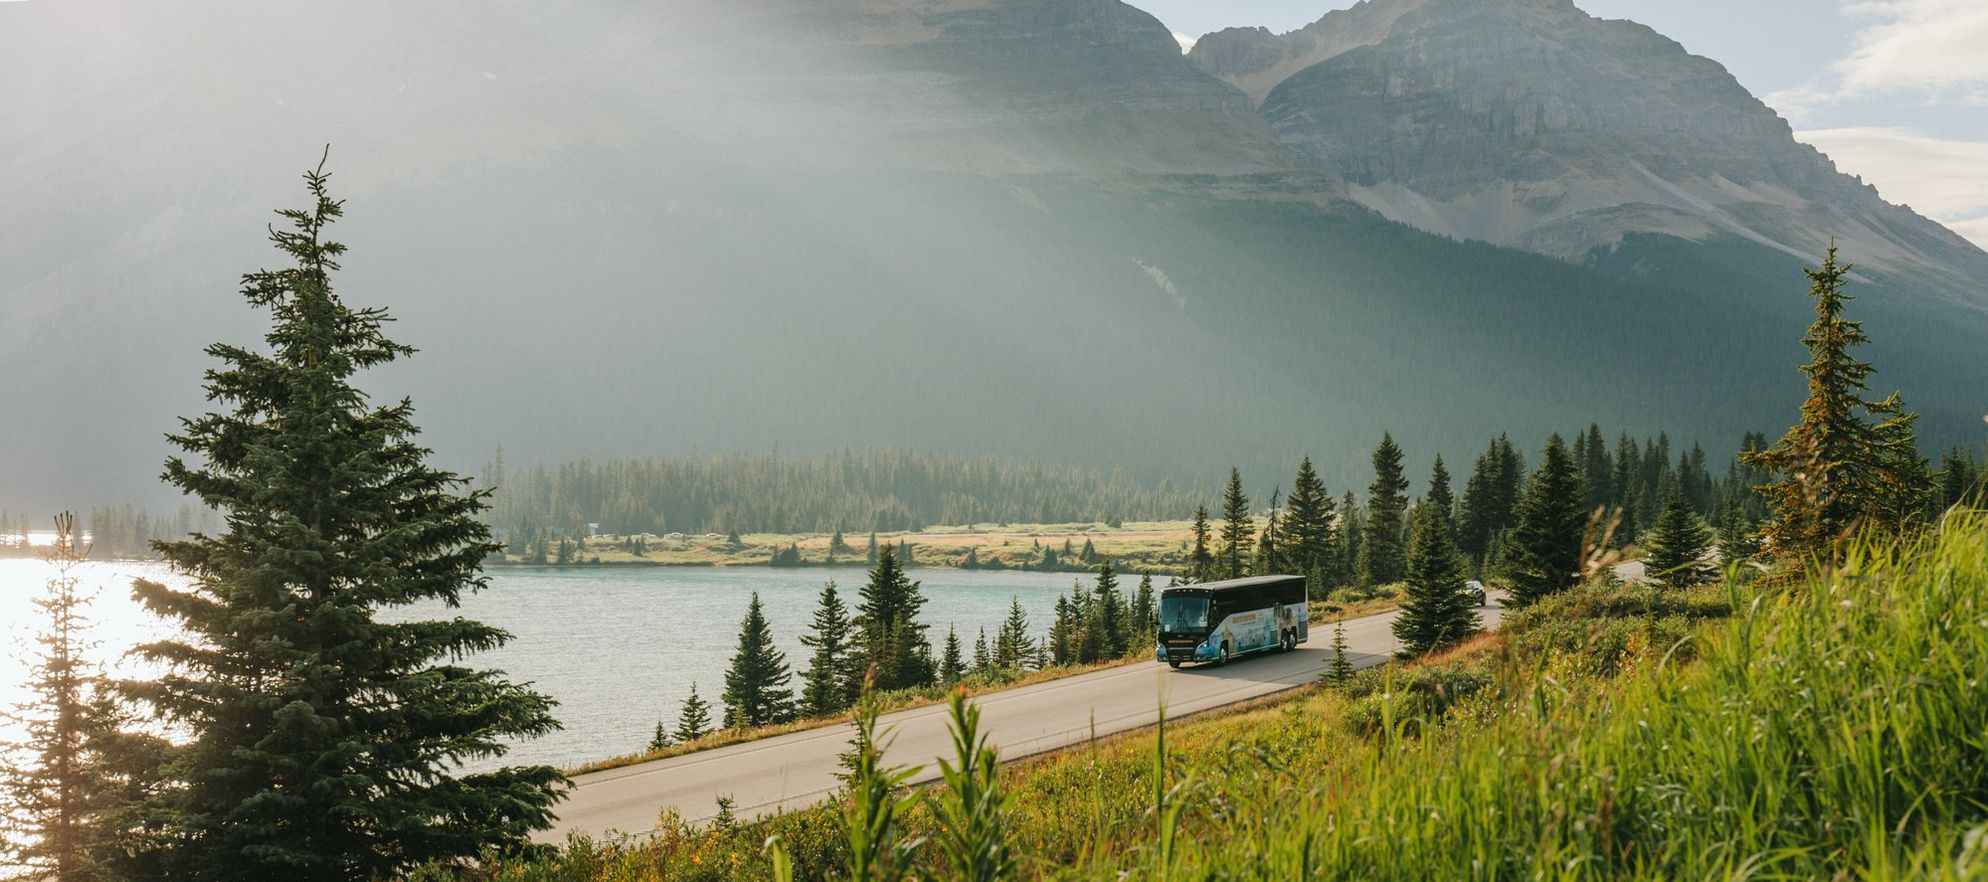 Brewster Sightseeing - Explore Banff National Park by tour